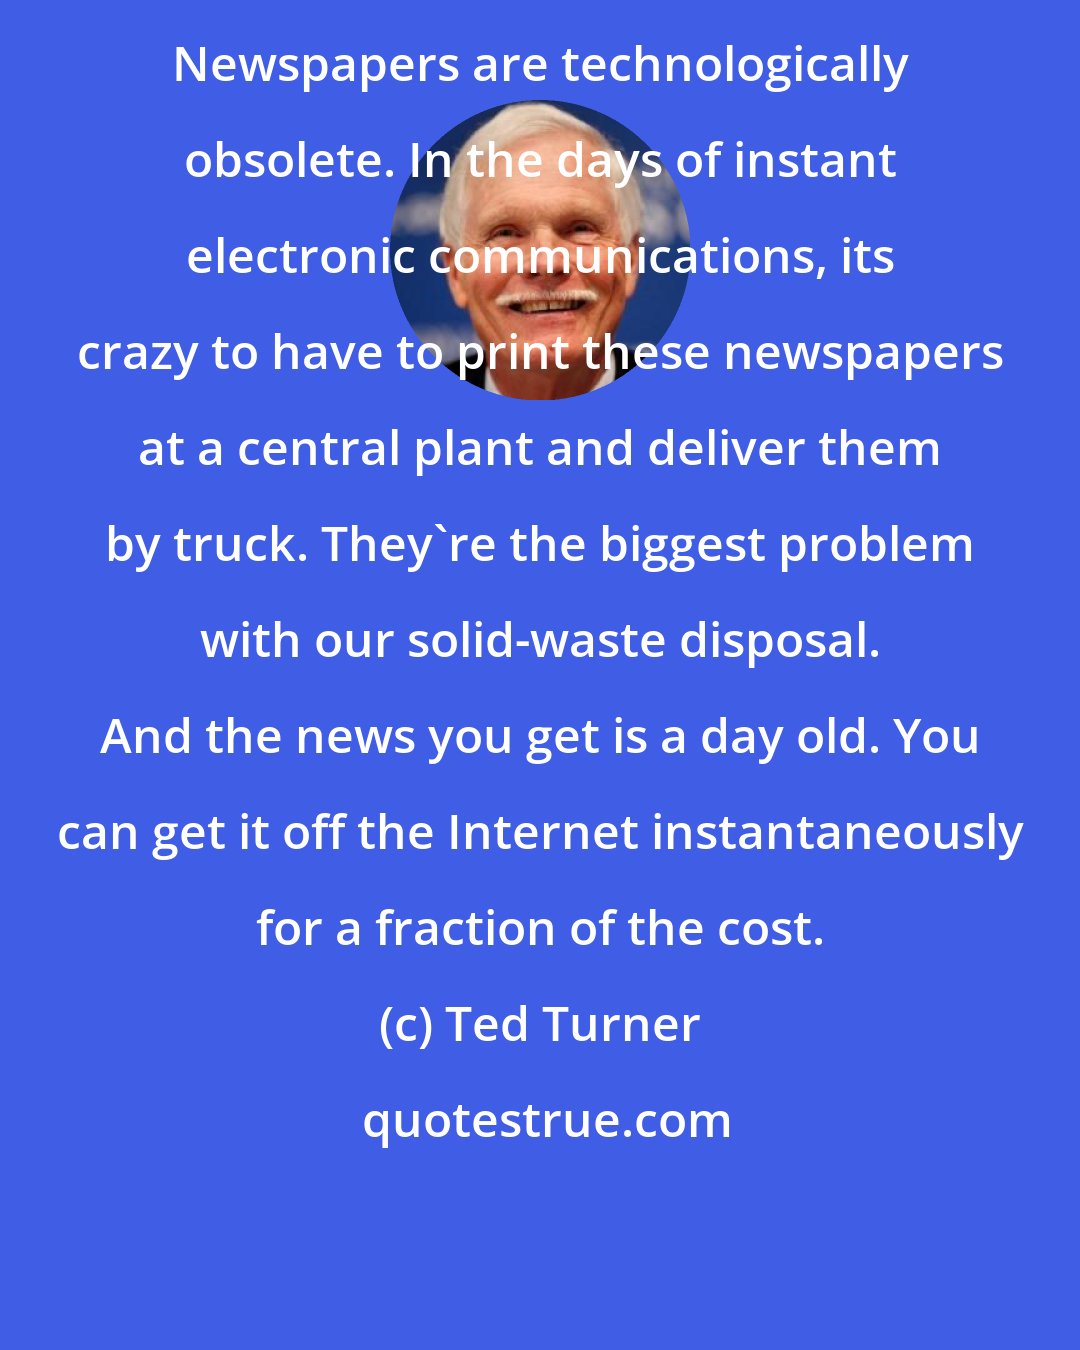 Ted Turner: Newspapers are technologically obsolete. In the days of instant electronic communications, its crazy to have to print these newspapers at a central plant and deliver them by truck. They're the biggest problem with our solid-waste disposal. And the news you get is a day old. You can get it off the Internet instantaneously for a fraction of the cost.